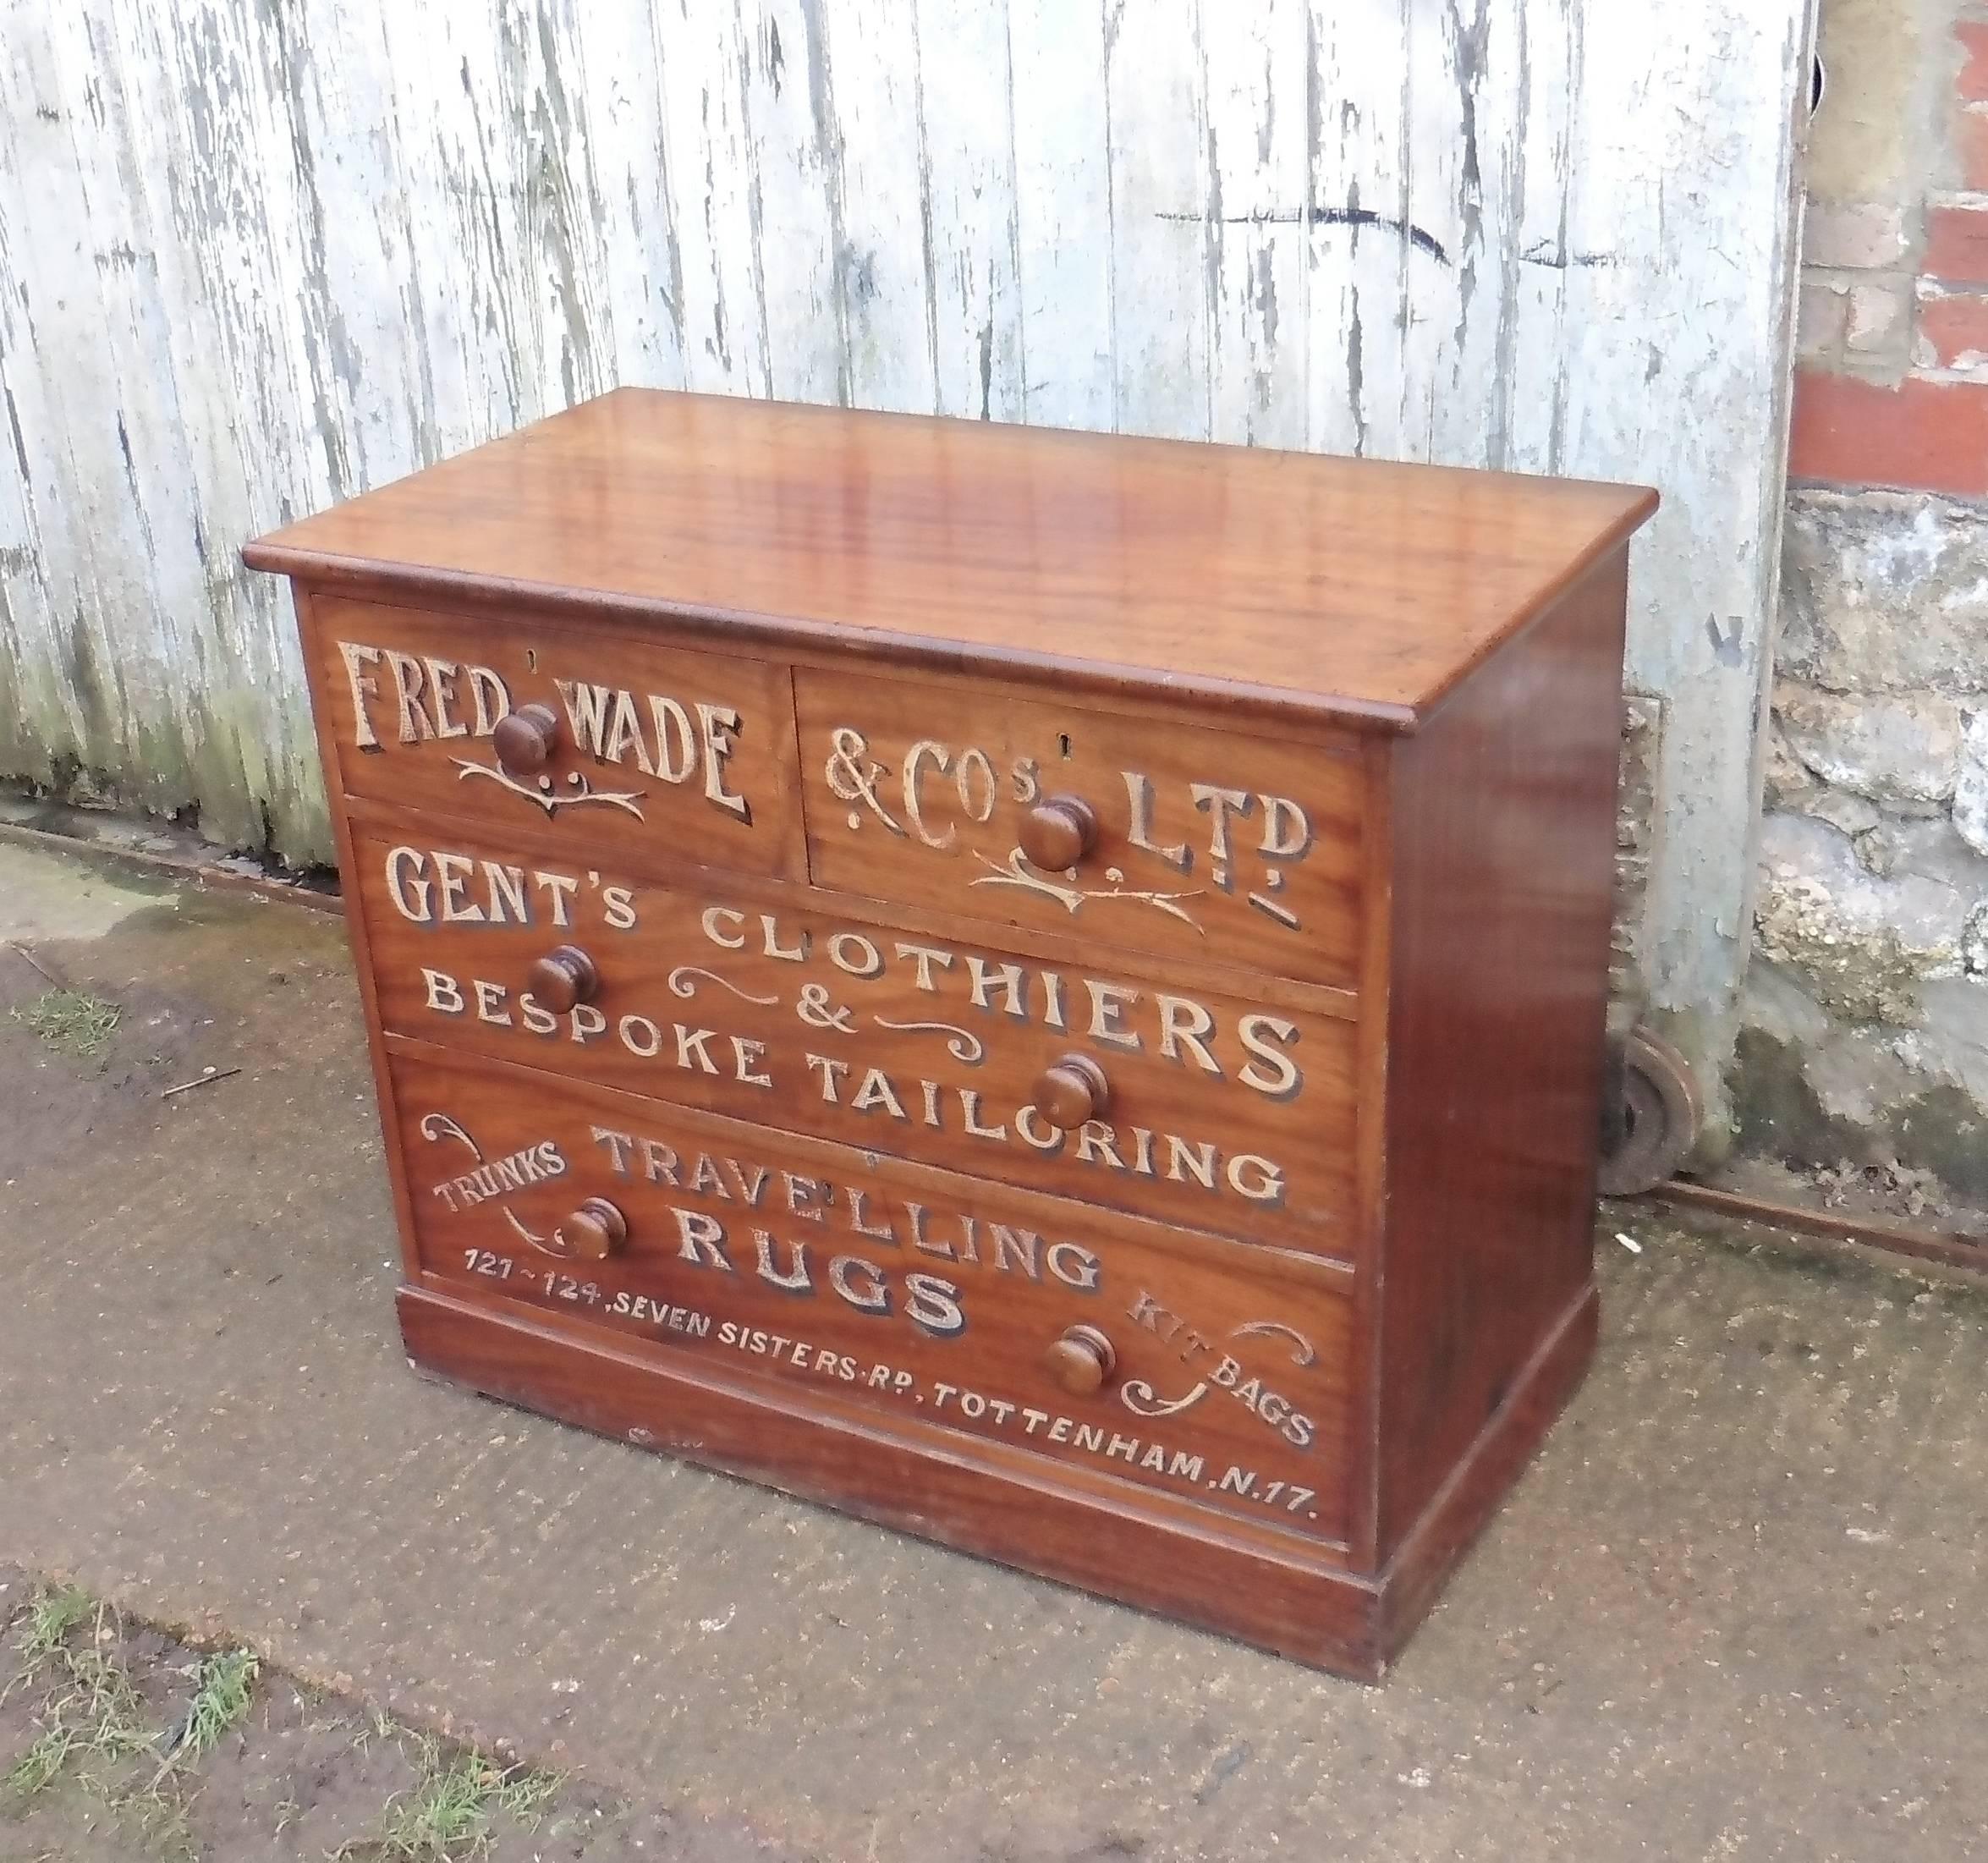 This is a small chest of drawers painted with advertisements from Fred Wade Gentlemans Outfitter, the chest of drawers is made in mahogany and has gold and shadowed Lettering painted on the front, we also have larger chest of drawers from the same